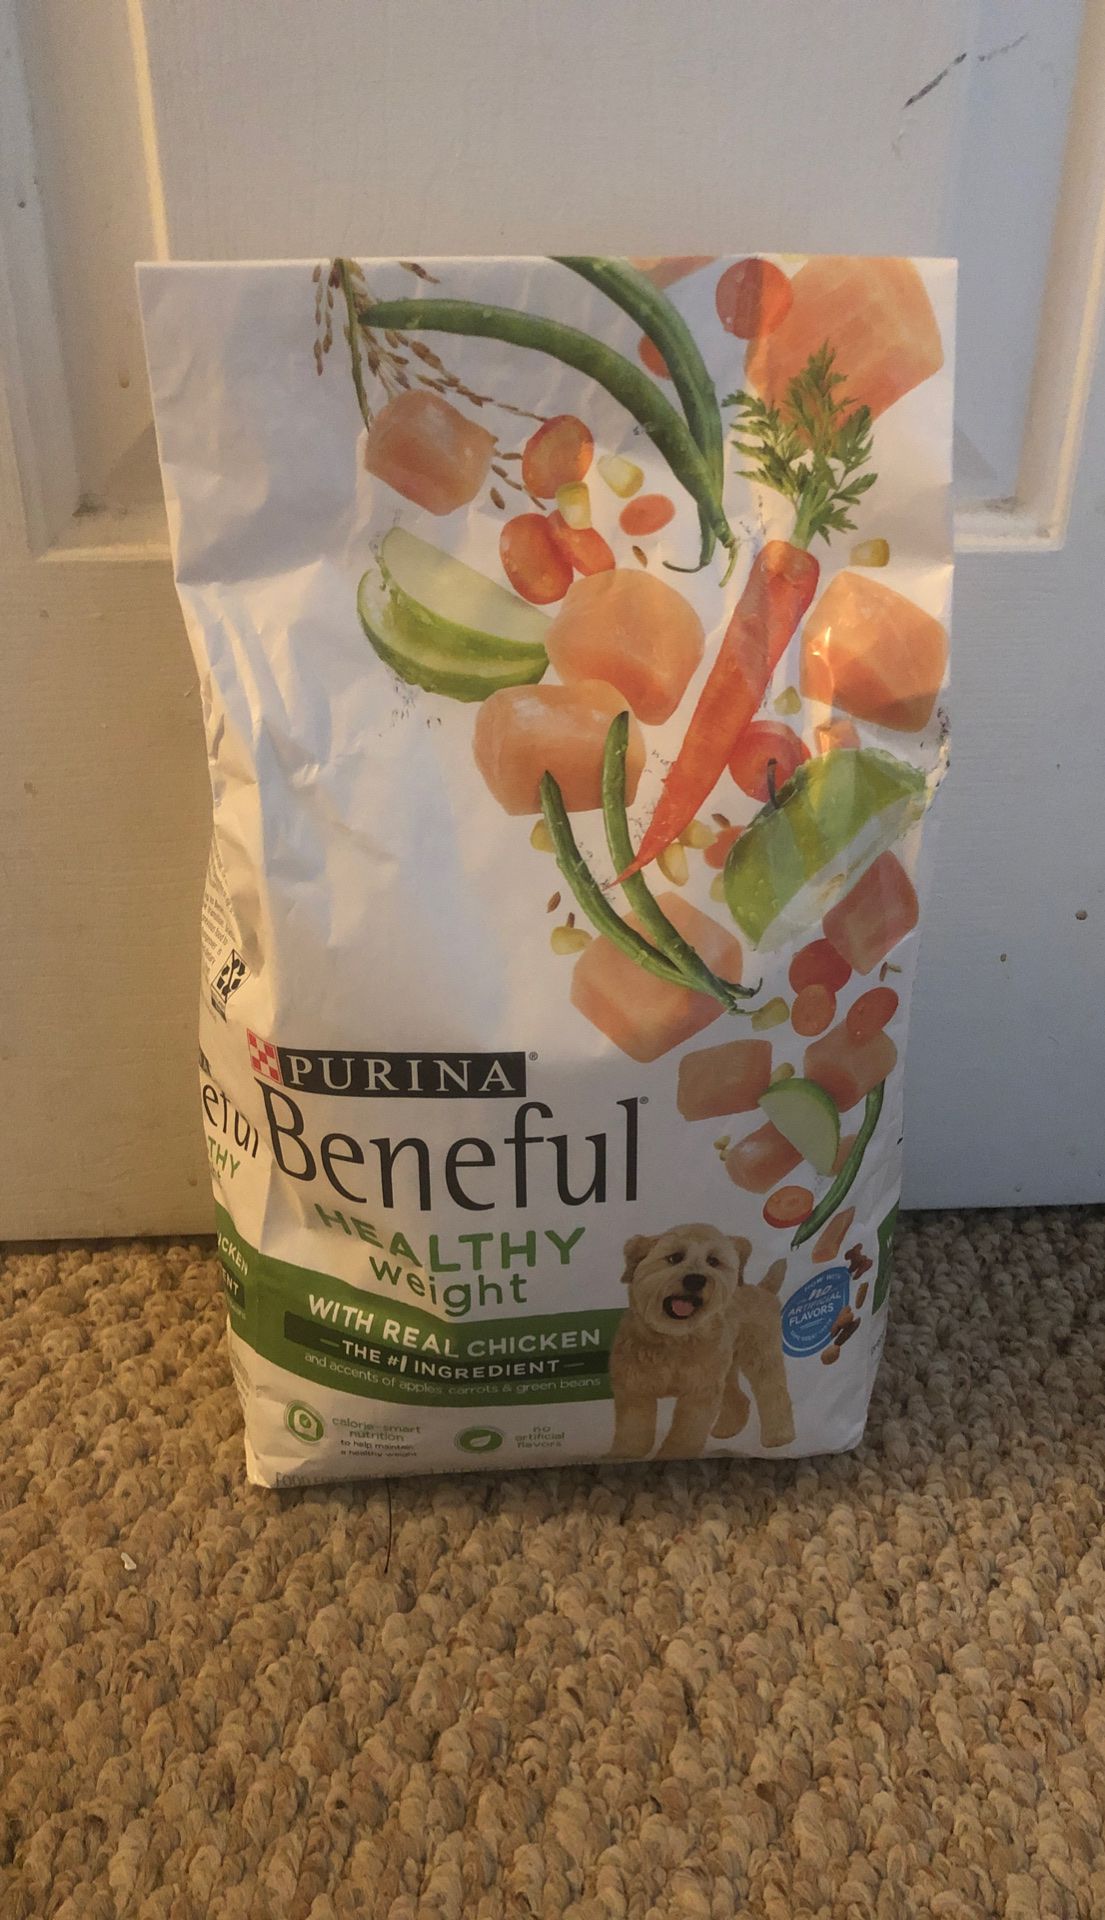 Purina Beneful Healthy Weight Adult Dog Food/ 3.5 LB/ 6bags/$20.00